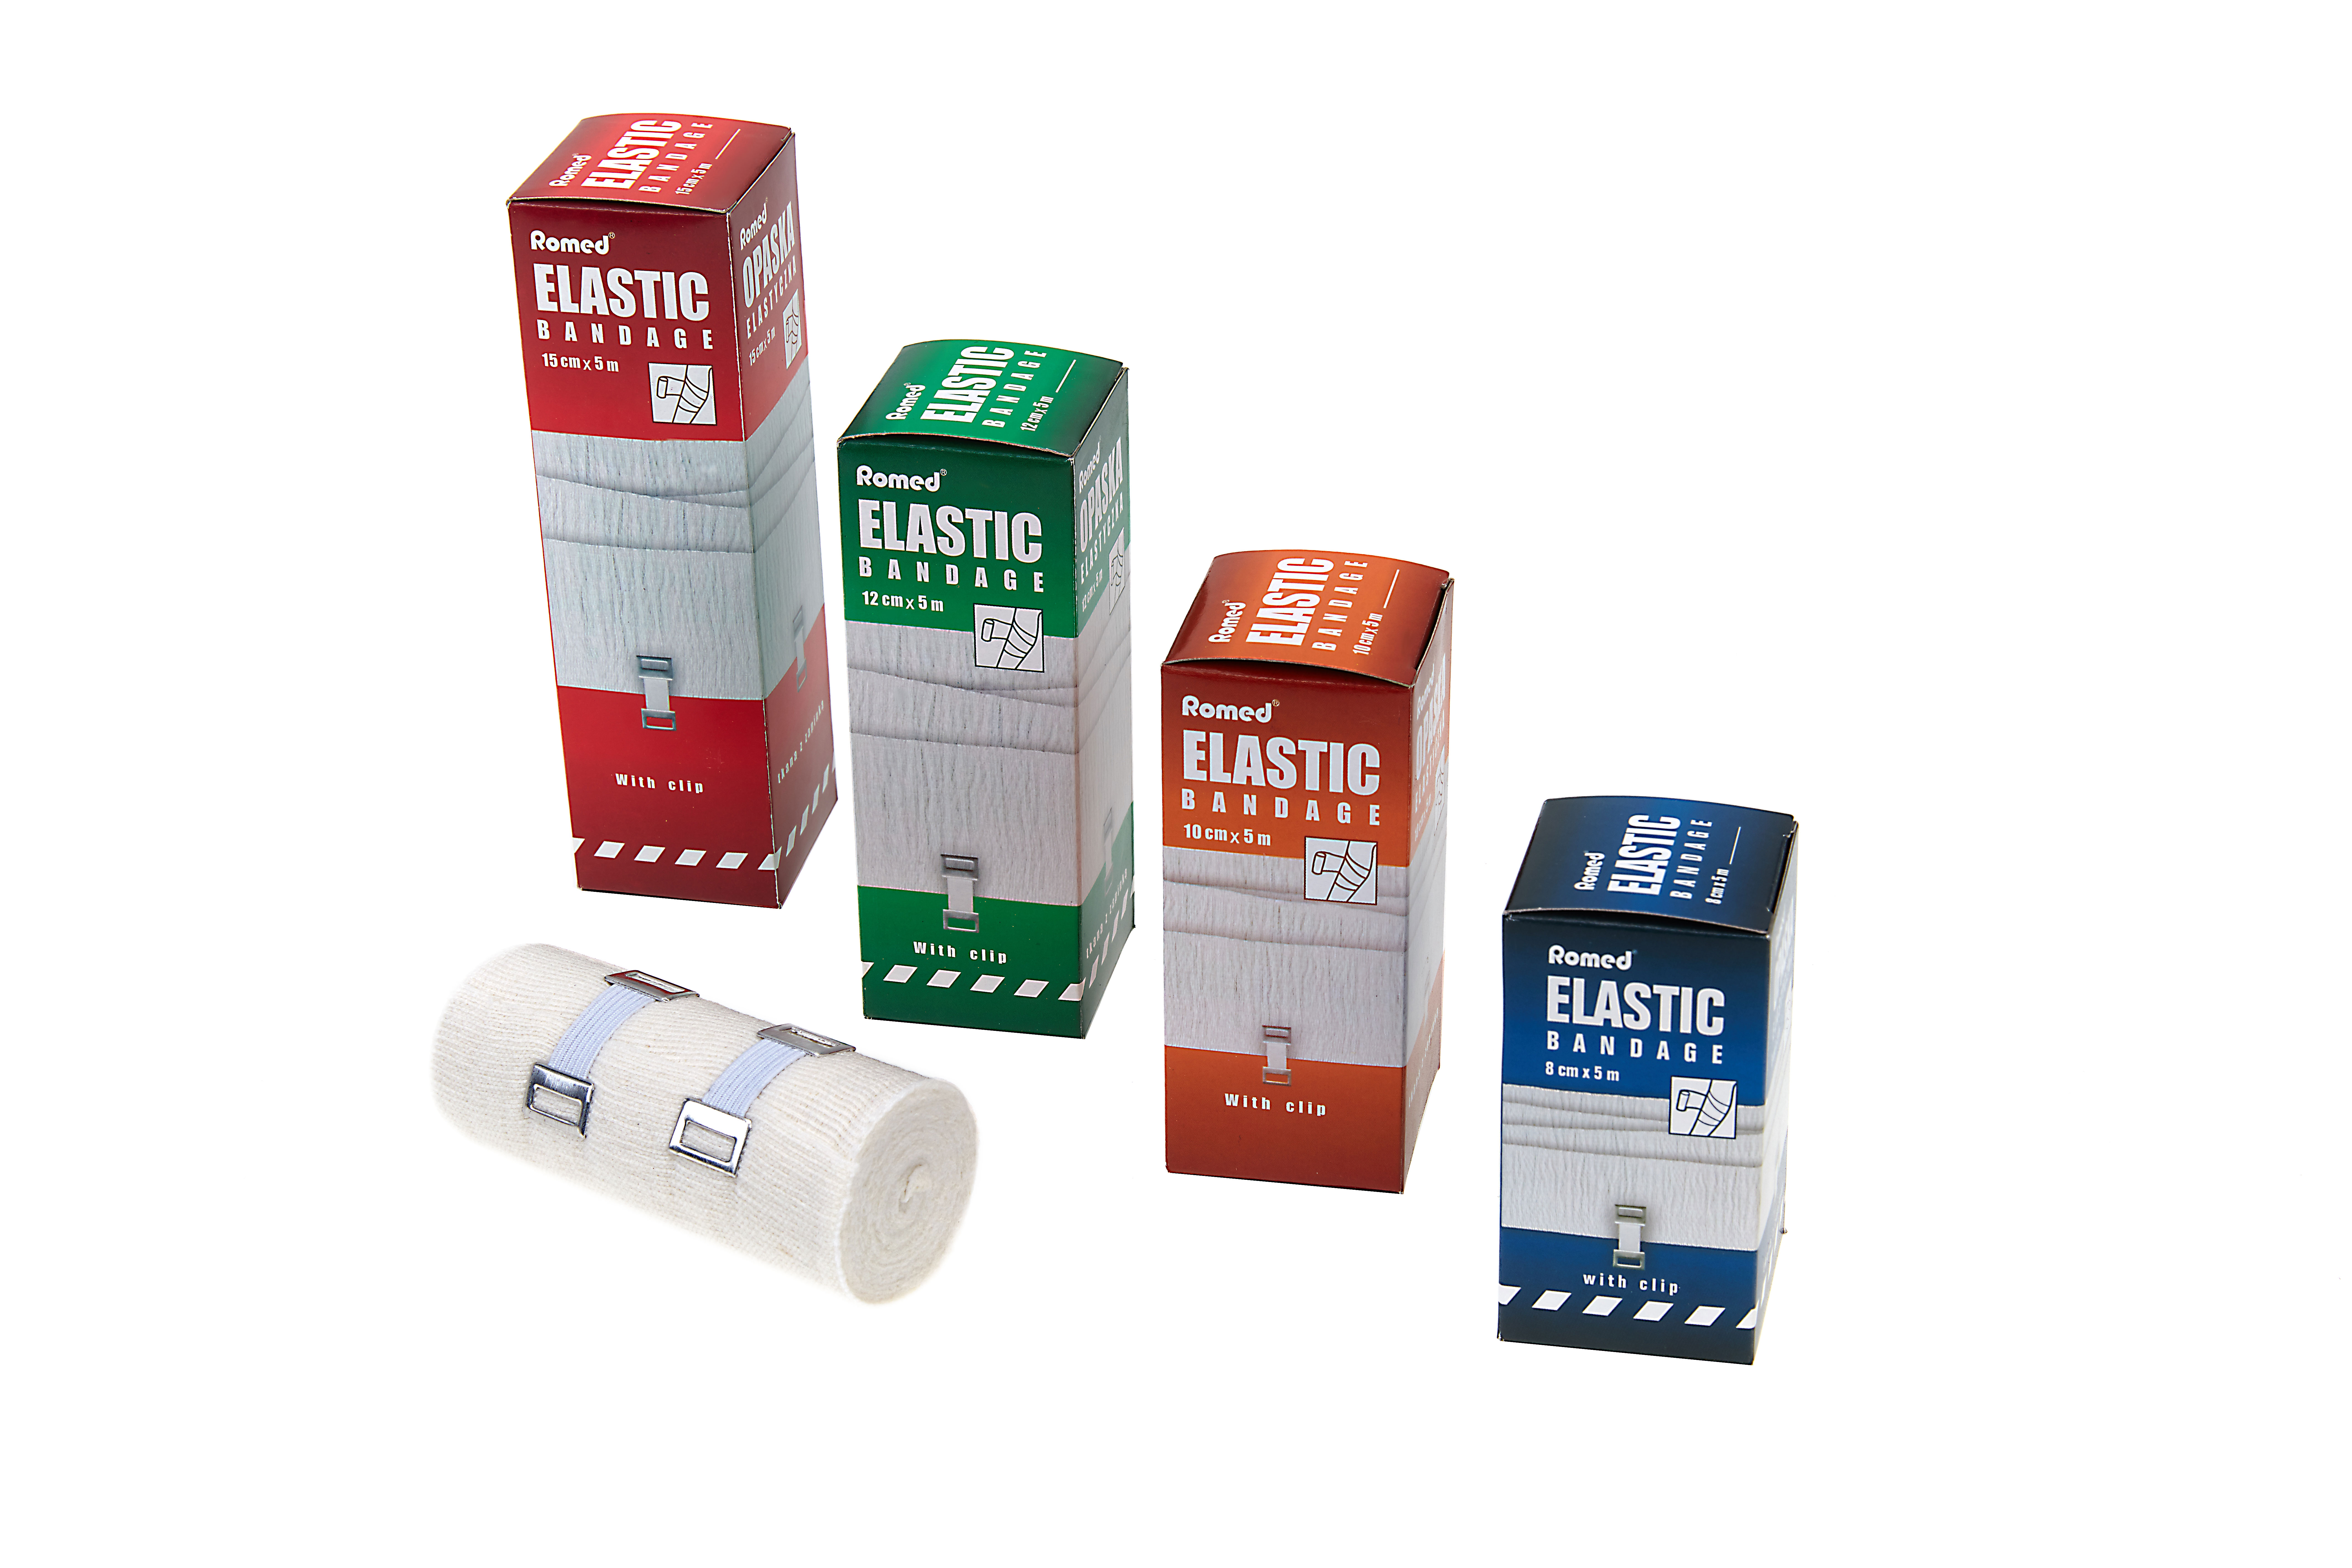 EB15X5 Romed elastic bandages 15cm x 5m, per piece in cellophane and box, per 5 boxes in polybag, 20 x 5 pcs = 100 pcs in a carton.